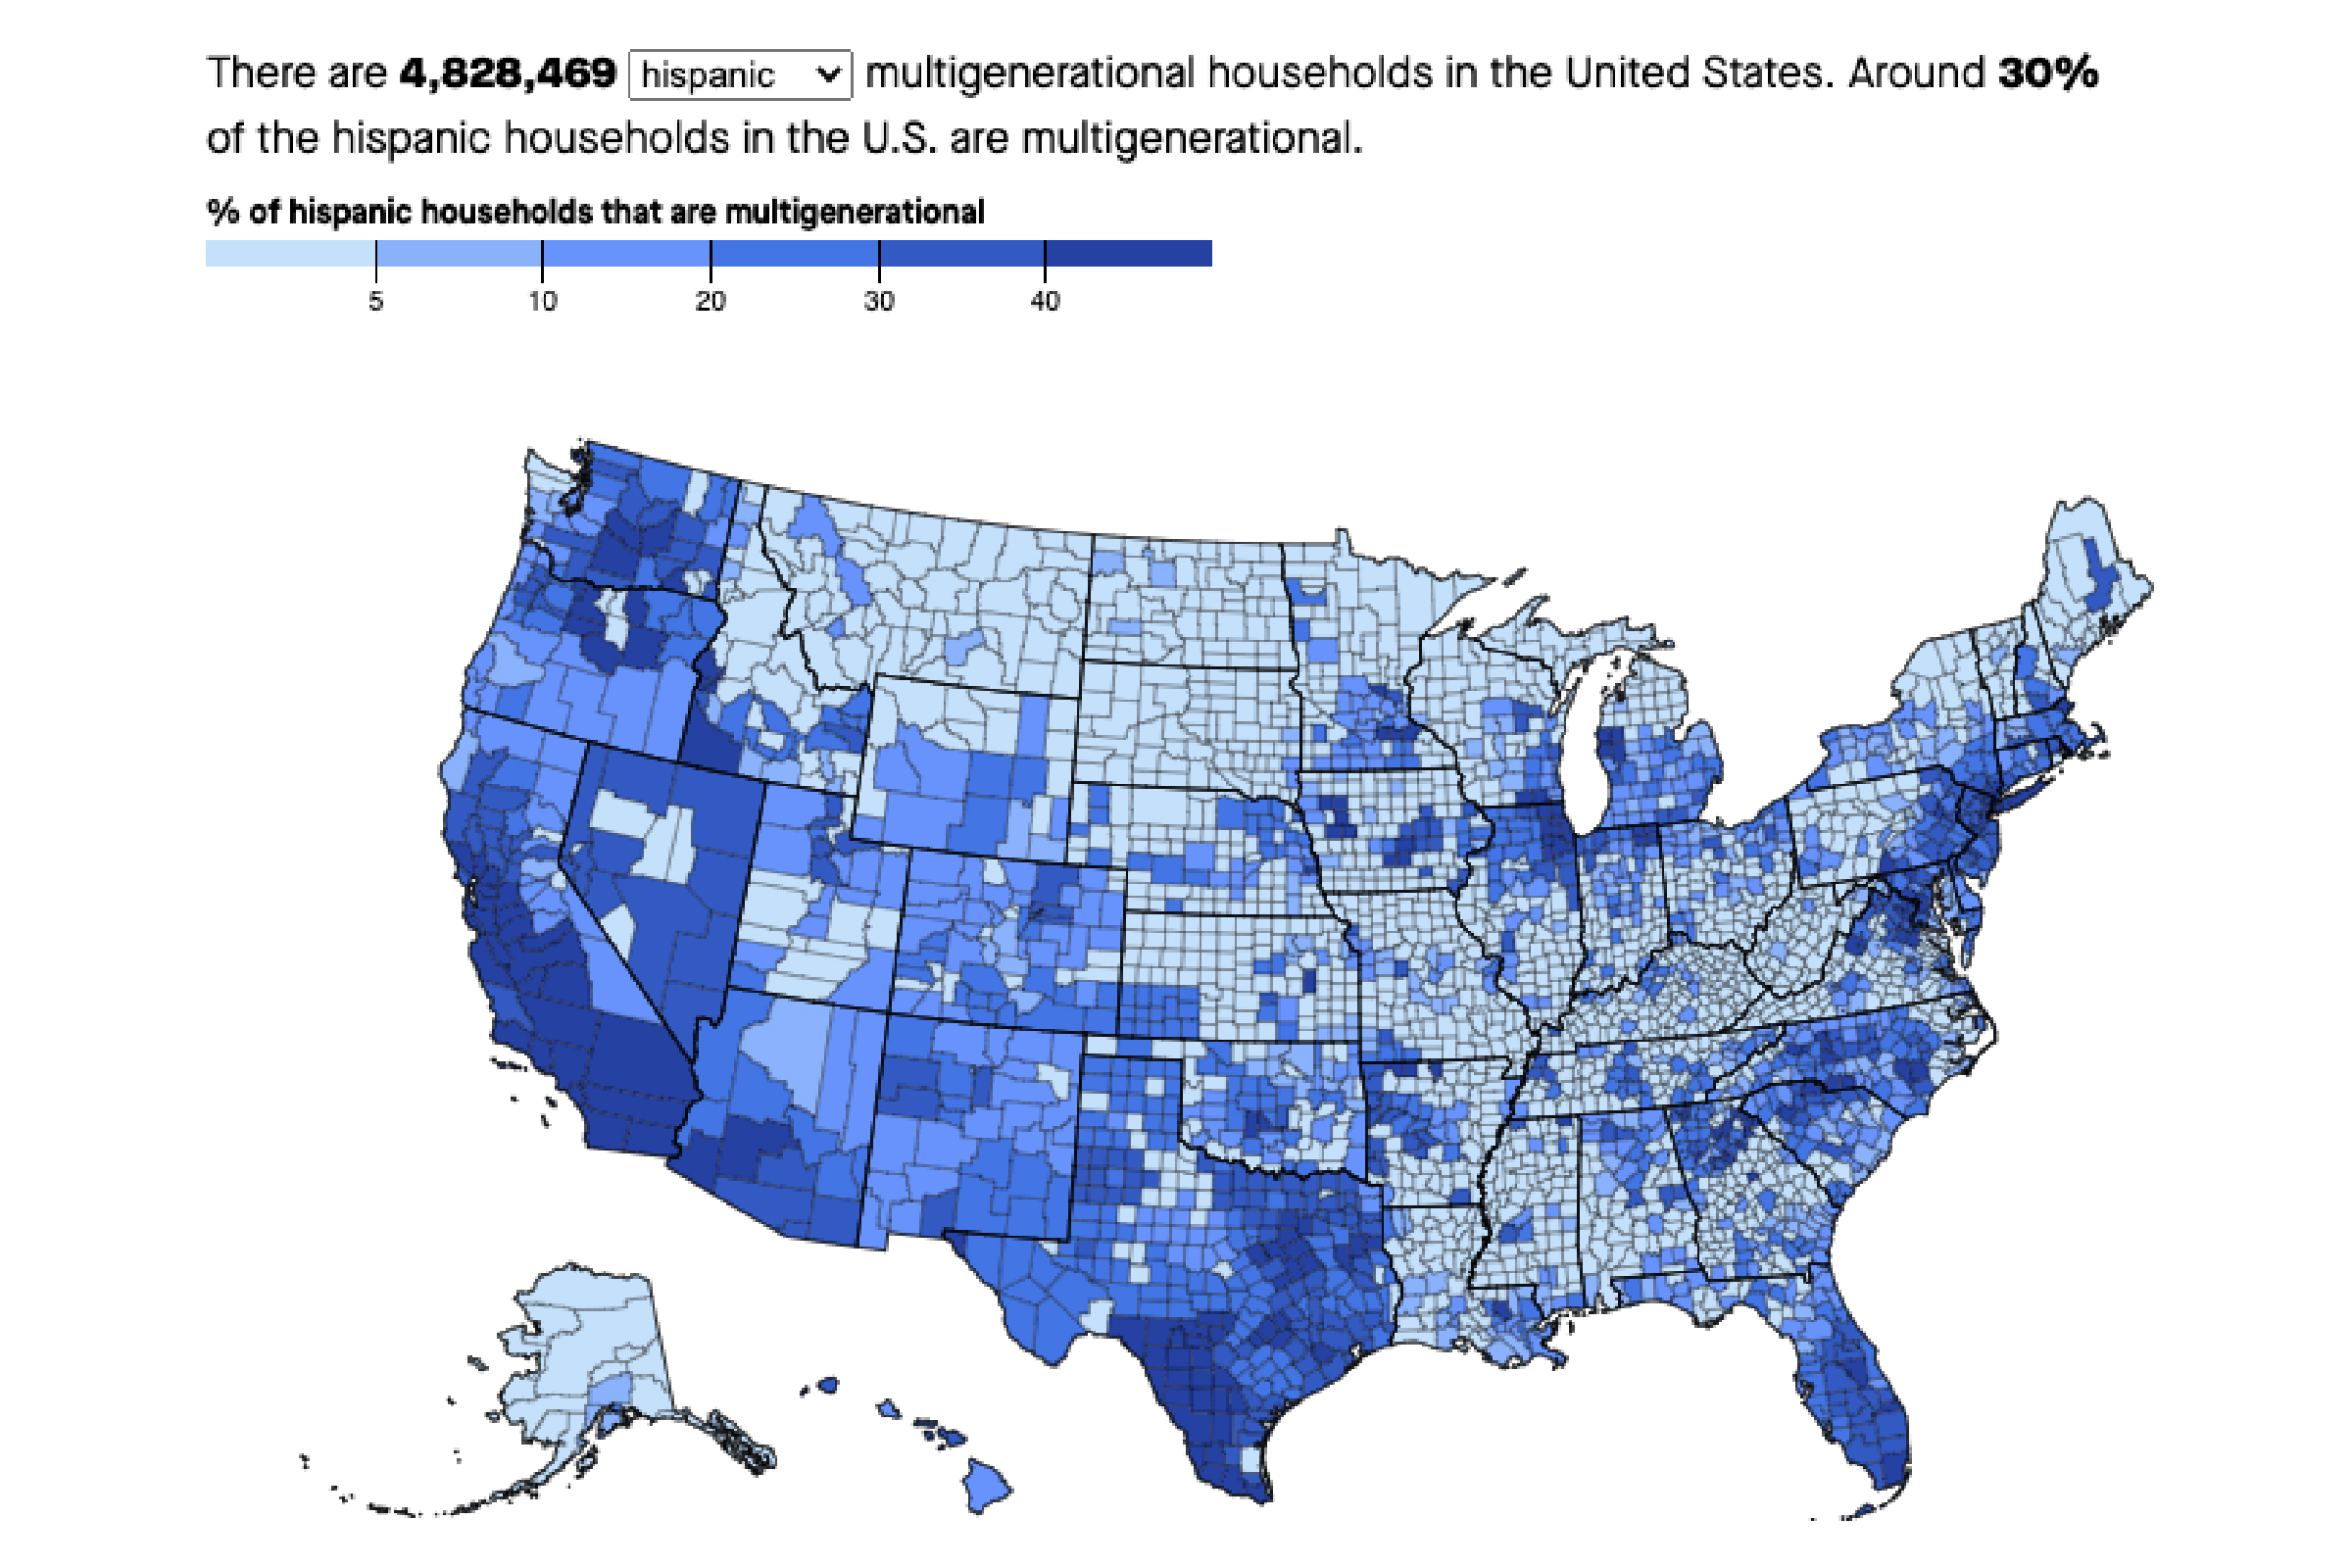 Interactive map with toggle feature showing makeup of multigenerational households in each county